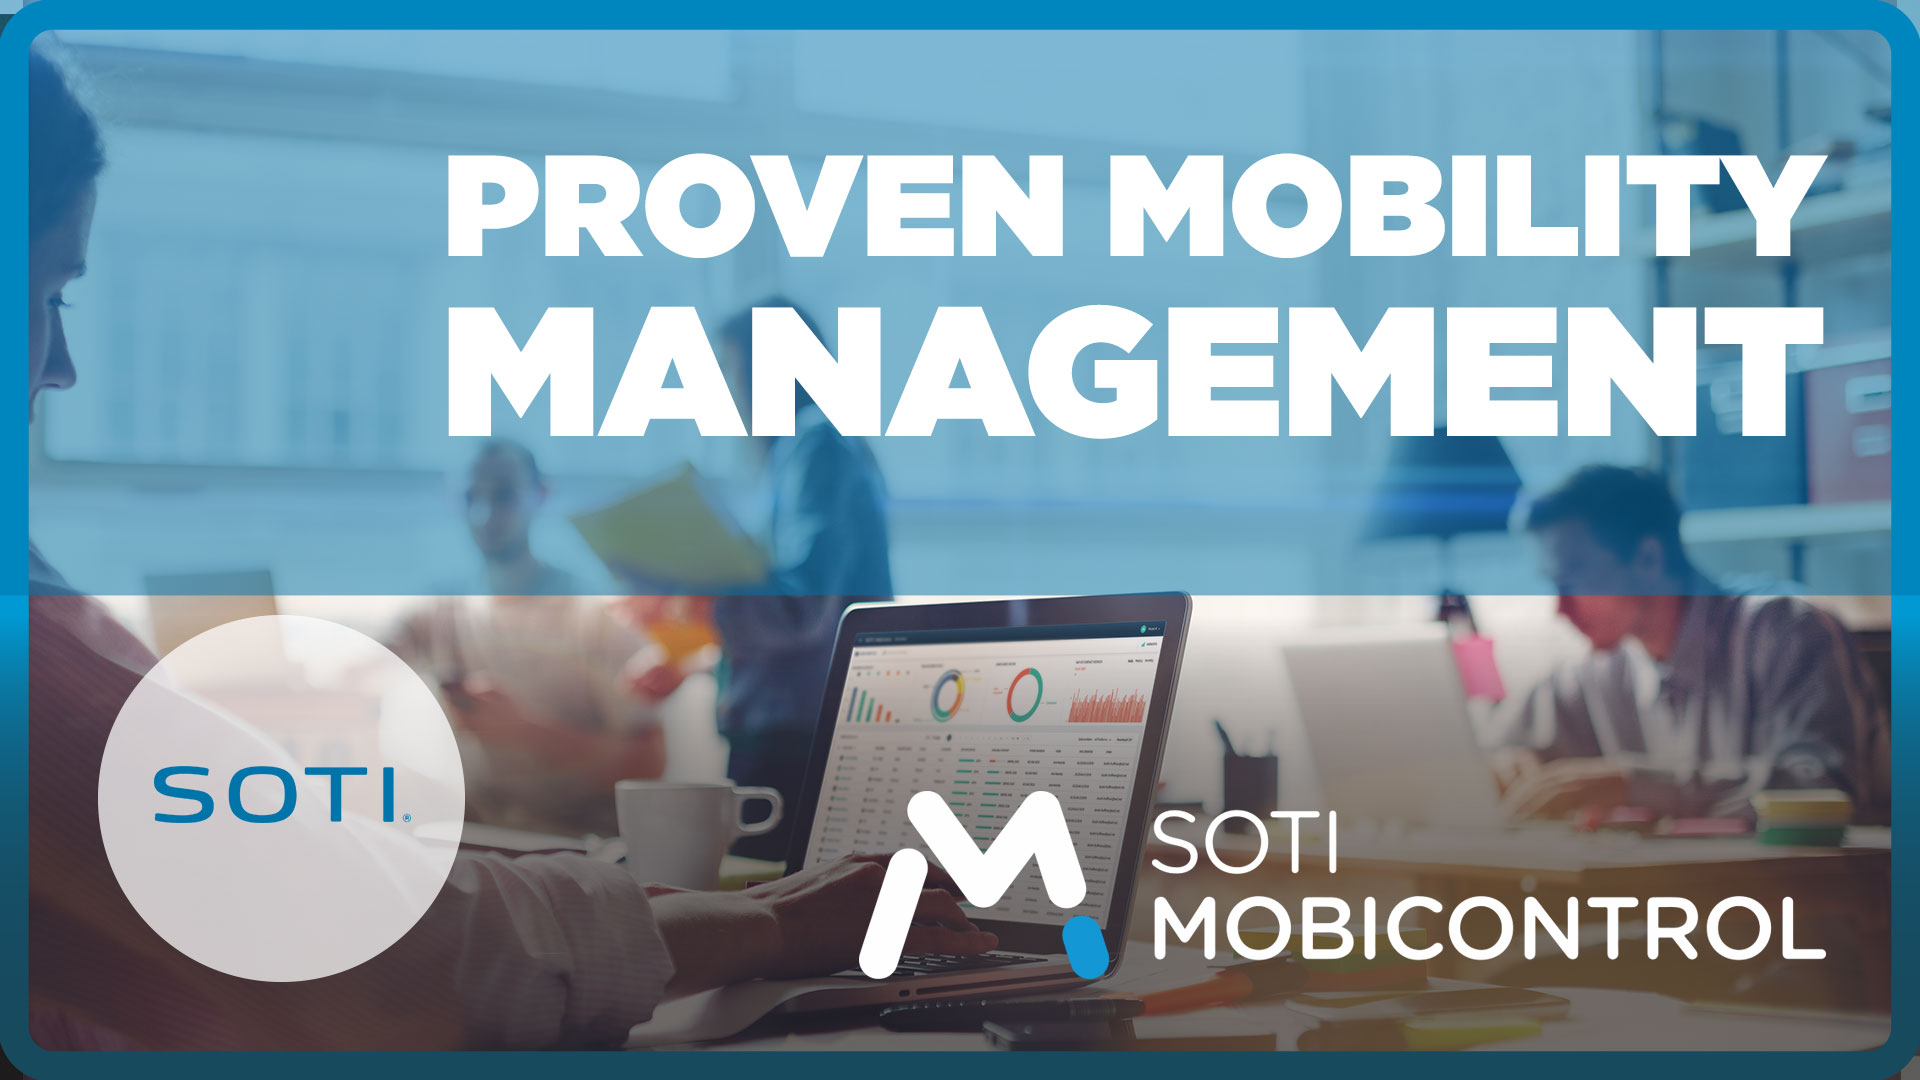 Video of SOTI MobiControl: Proven Mobility Management